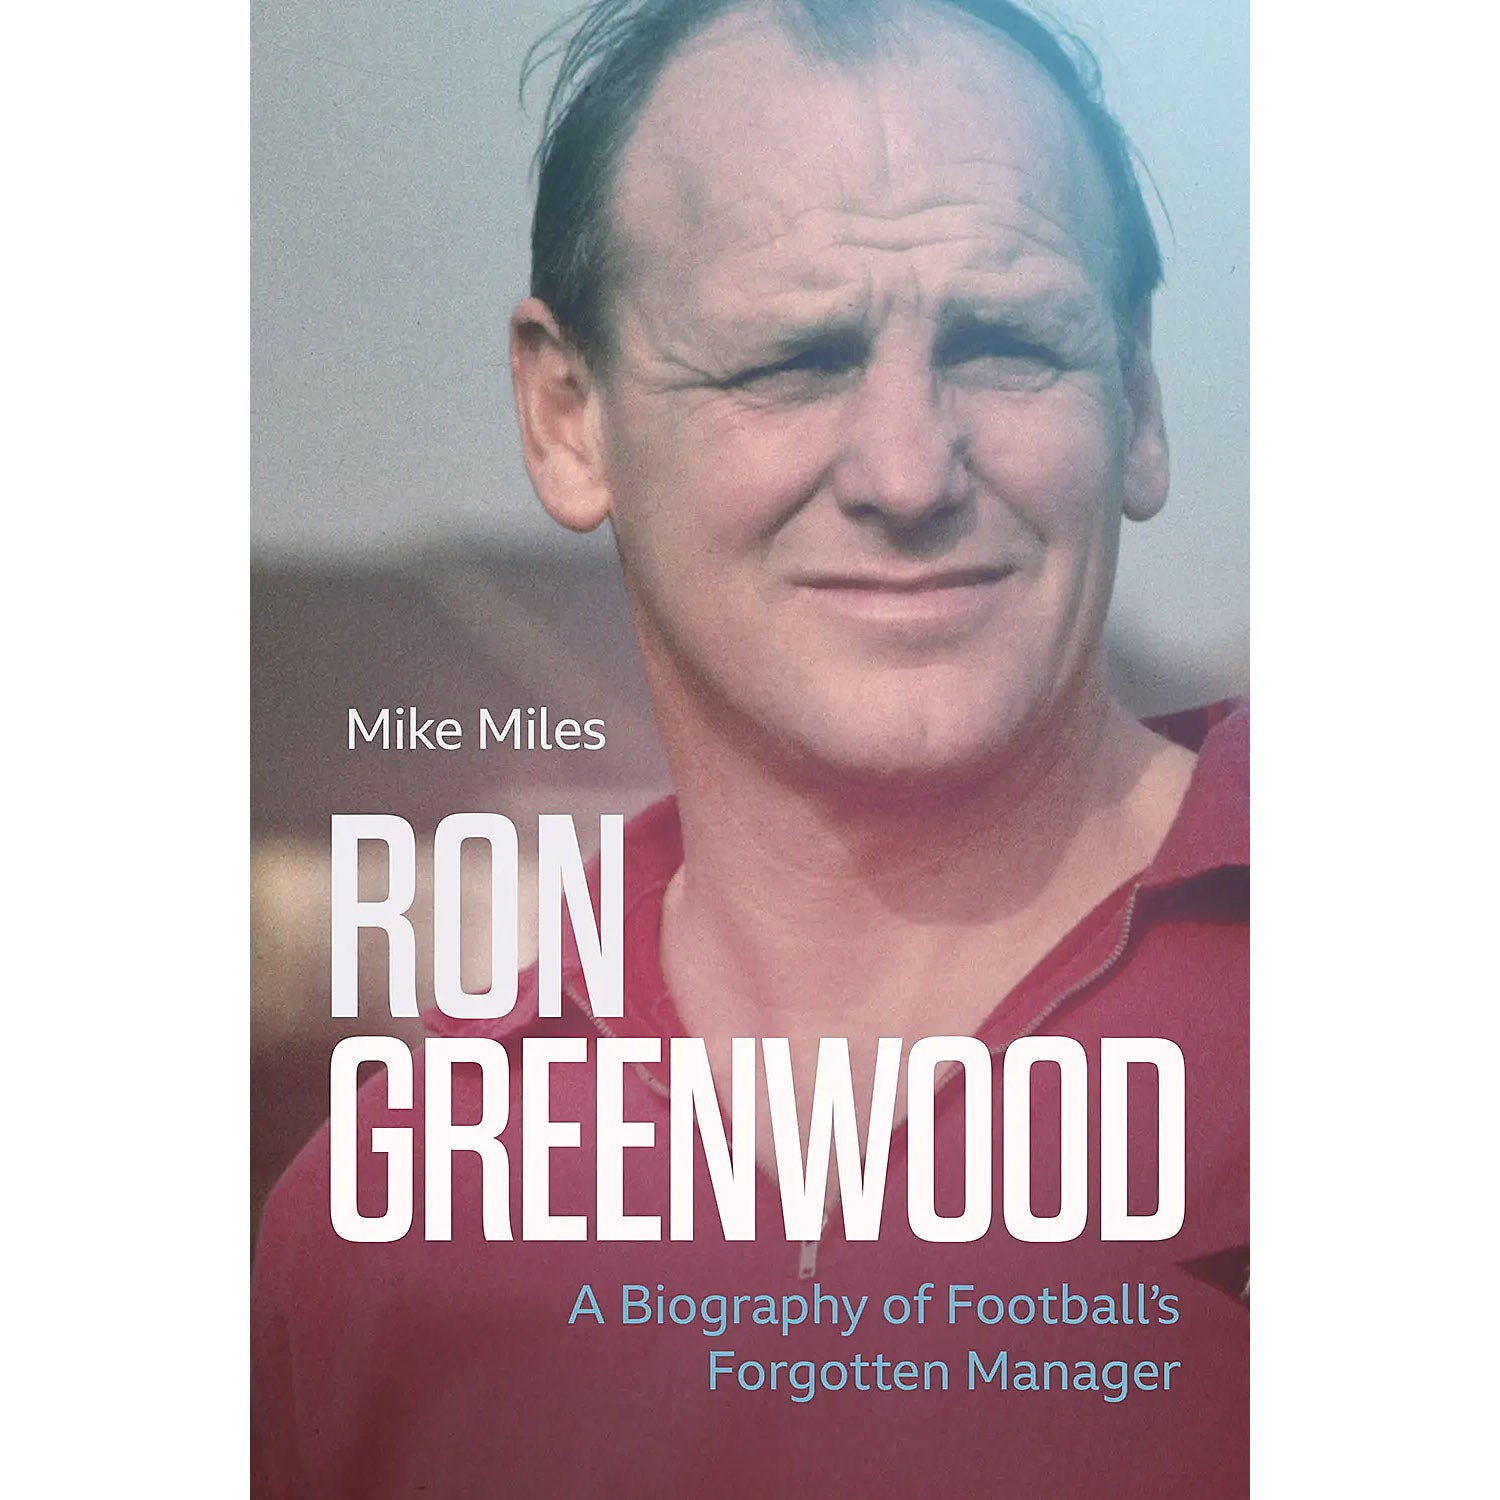 Ron Greenwood – A Biography of Football's Forgotten Manager